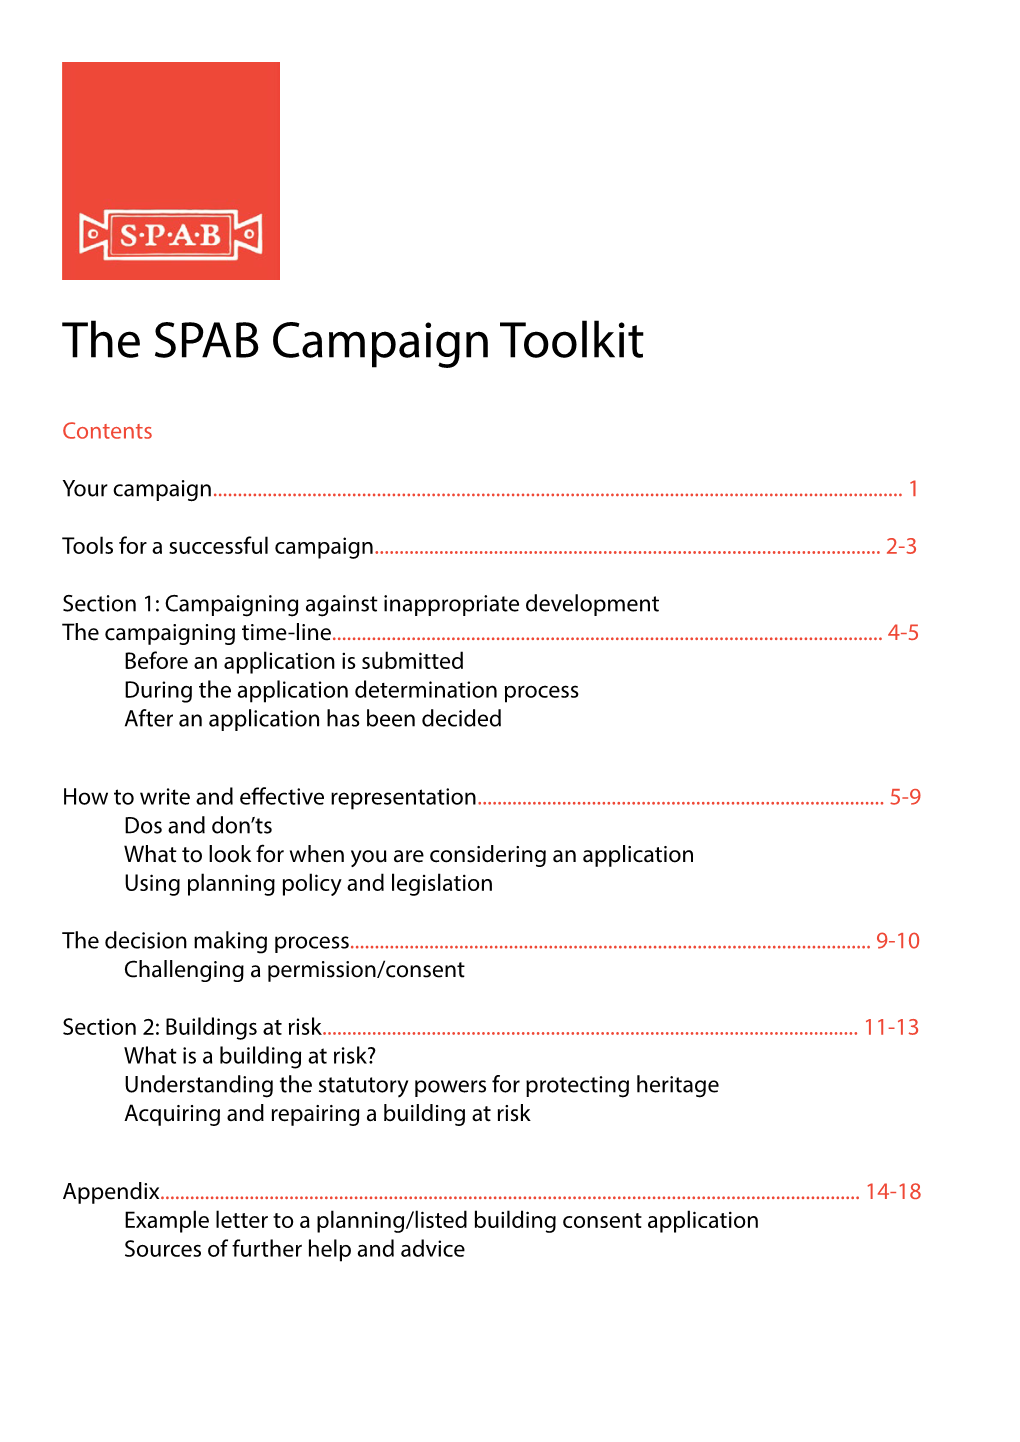 The SPAB Campaign Toolkit